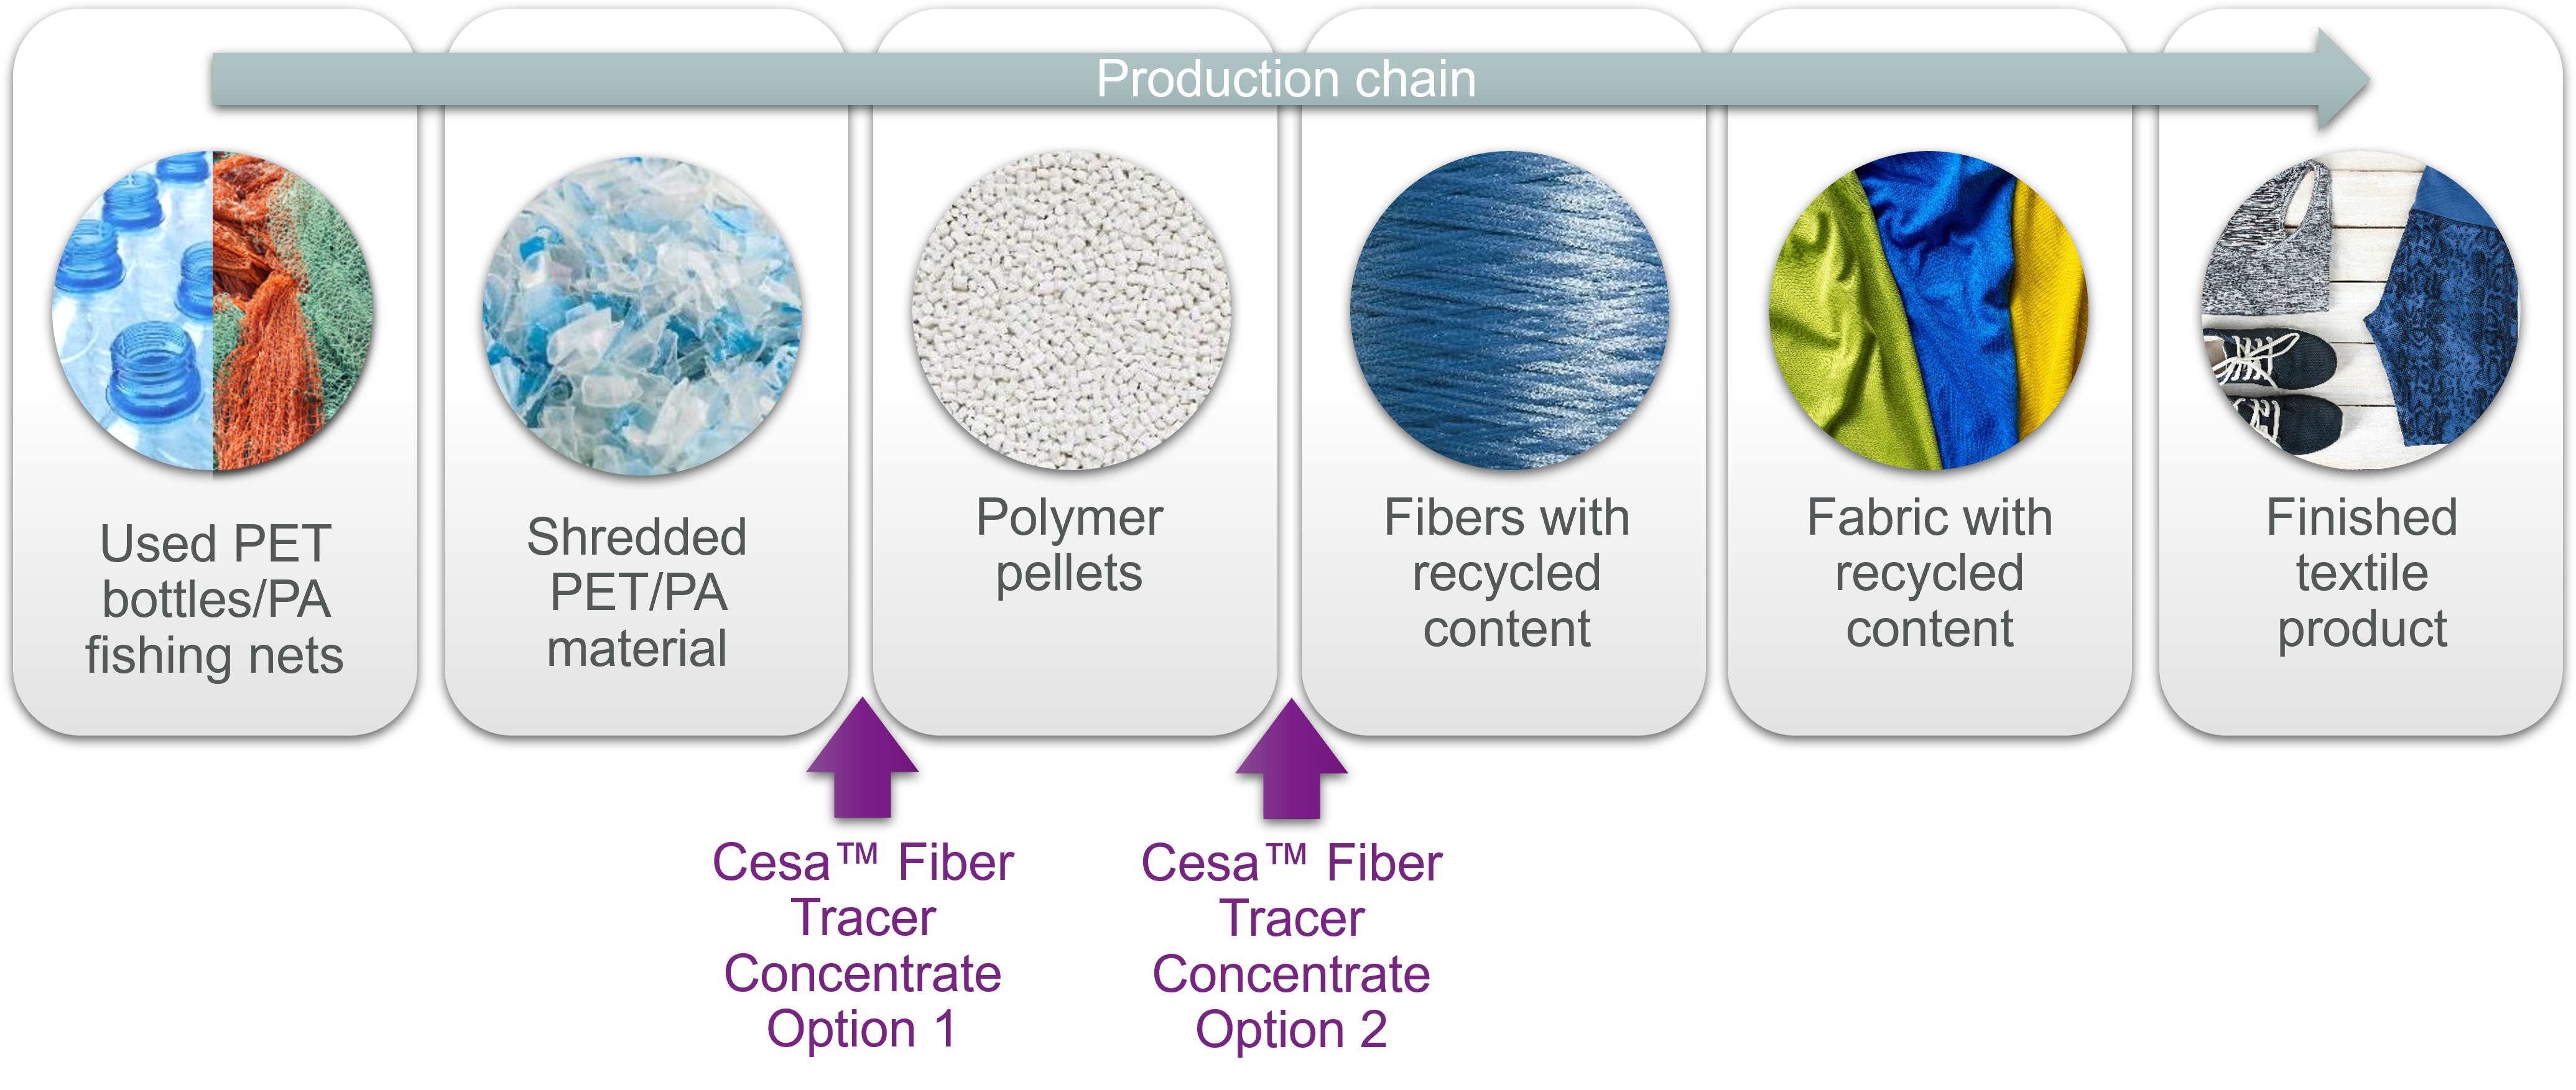 Recycled fibers, 0.05 g of (a) CO, (b) PES, and (c) CO/PES